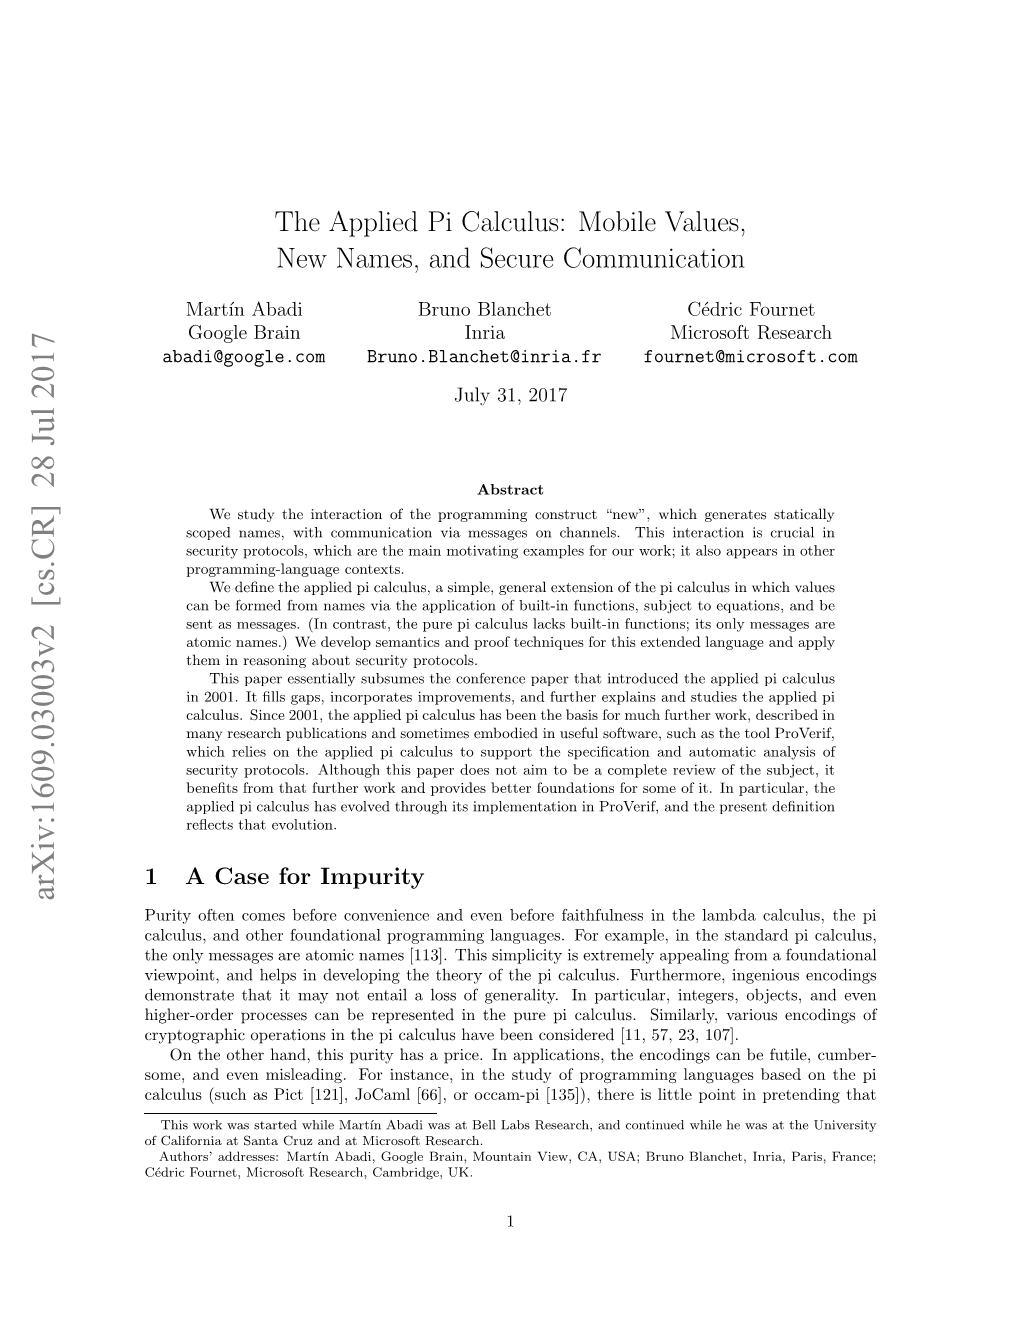 The Applied Pi Calculus: Mobile Values, New Names, and Secure